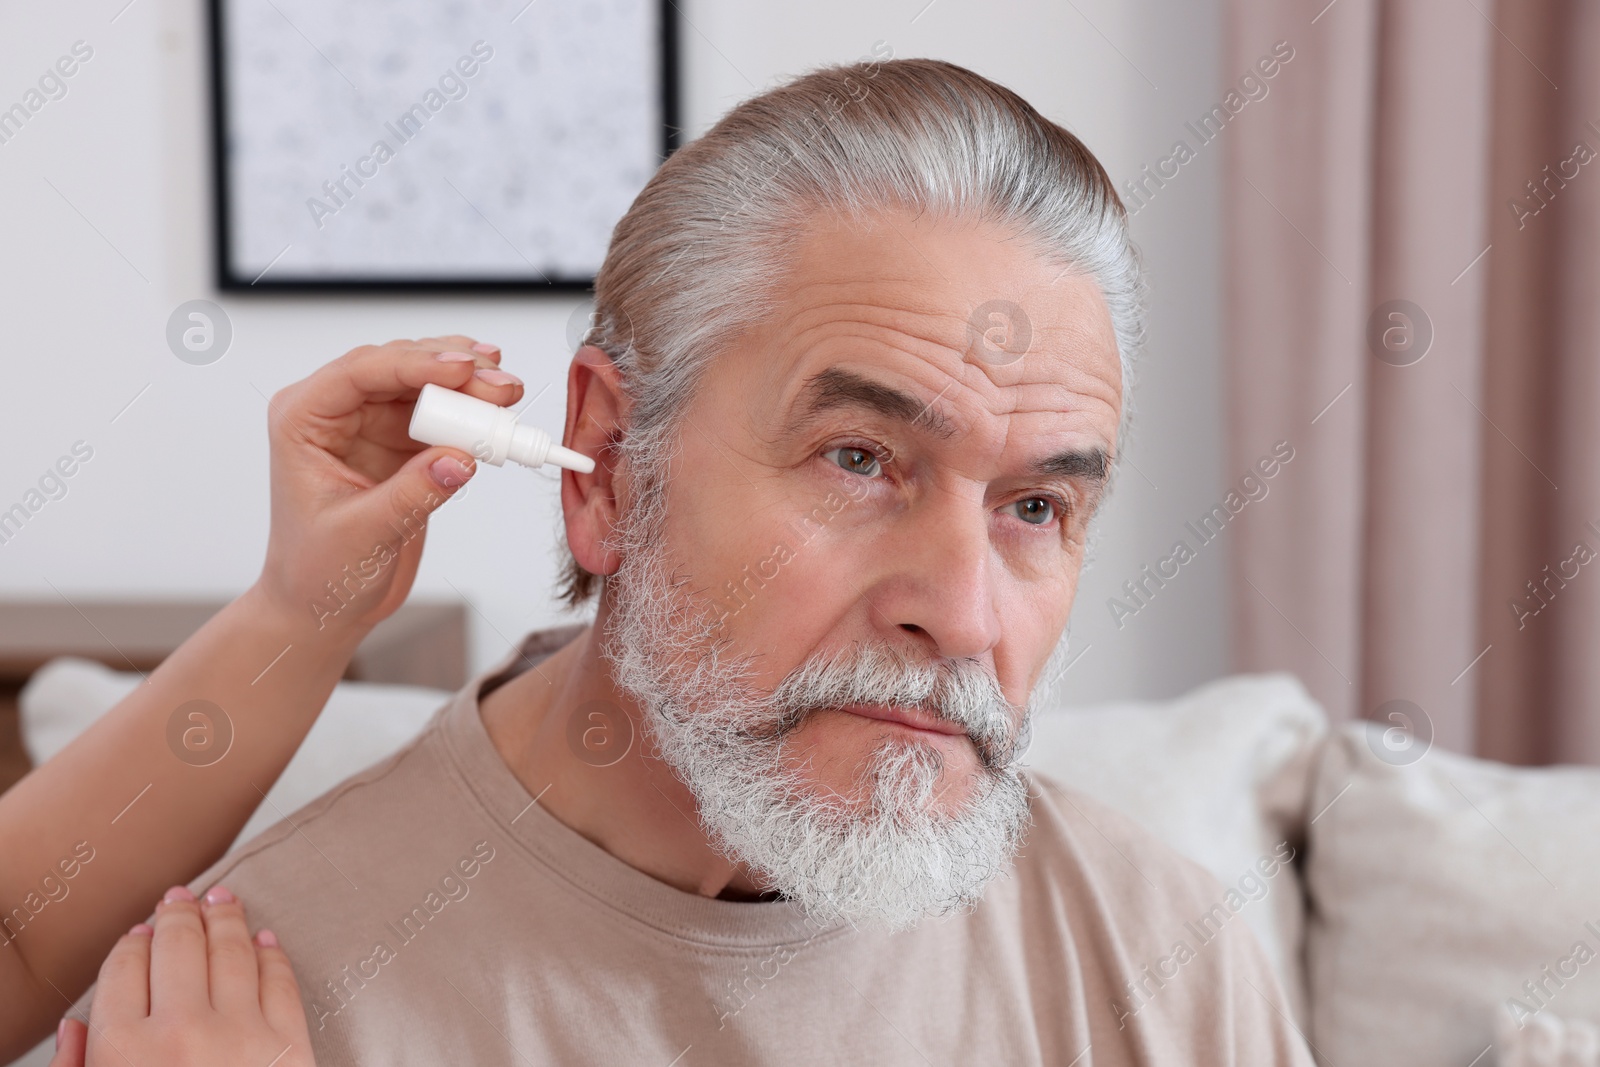 Photo of Young woman dripping medication into man's ear at home